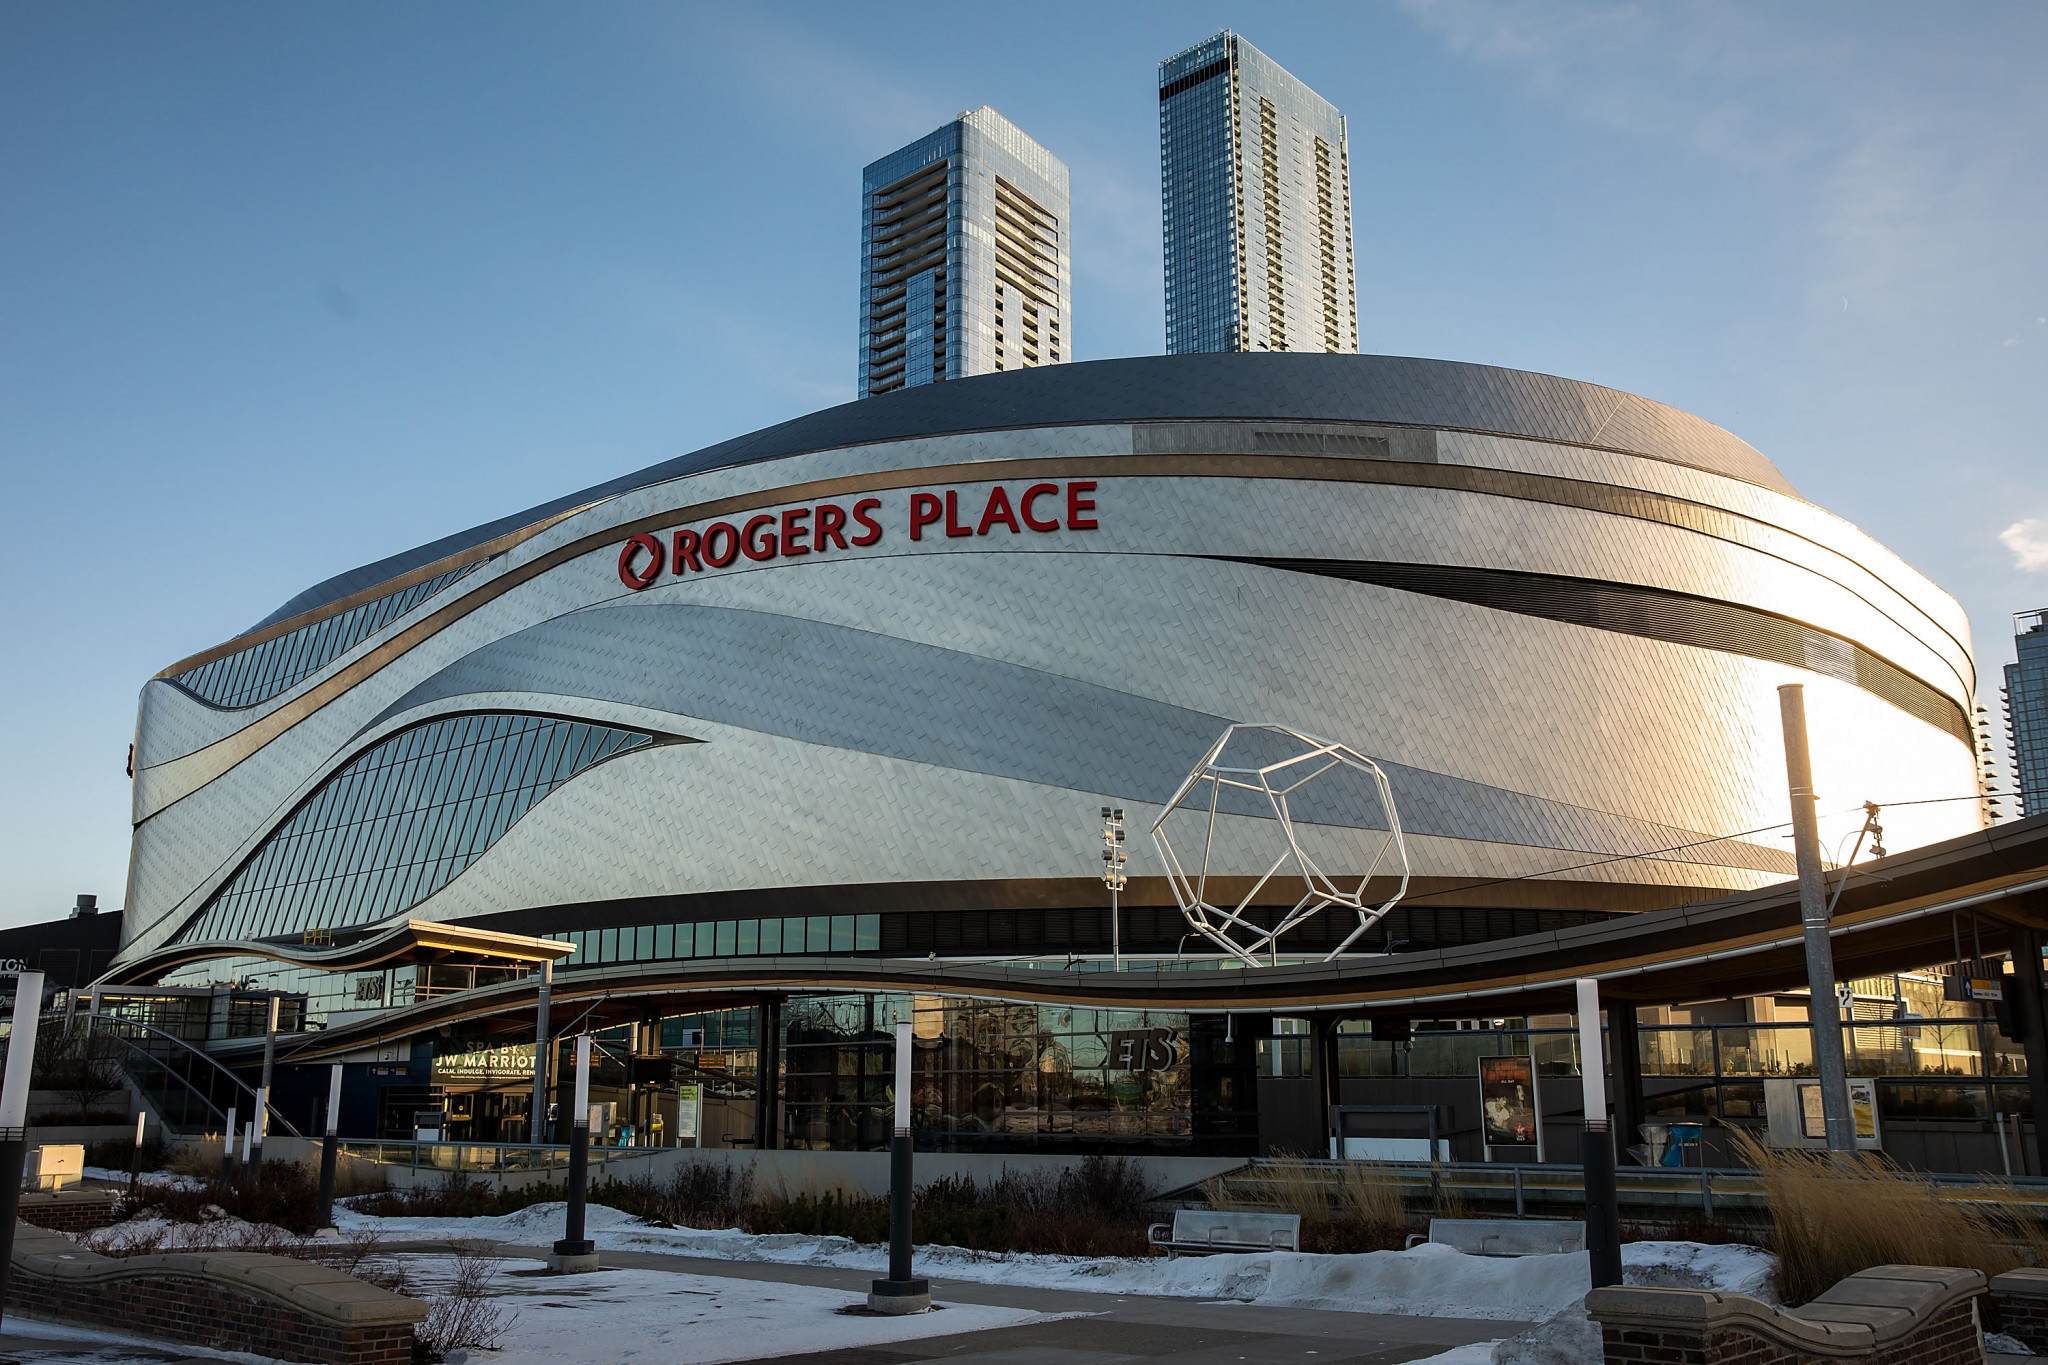 Rogers Place in Edmonton will be limited to half of its usual capacity of more than 18,000 for the IIHF World Junior Championship ©Getty Images